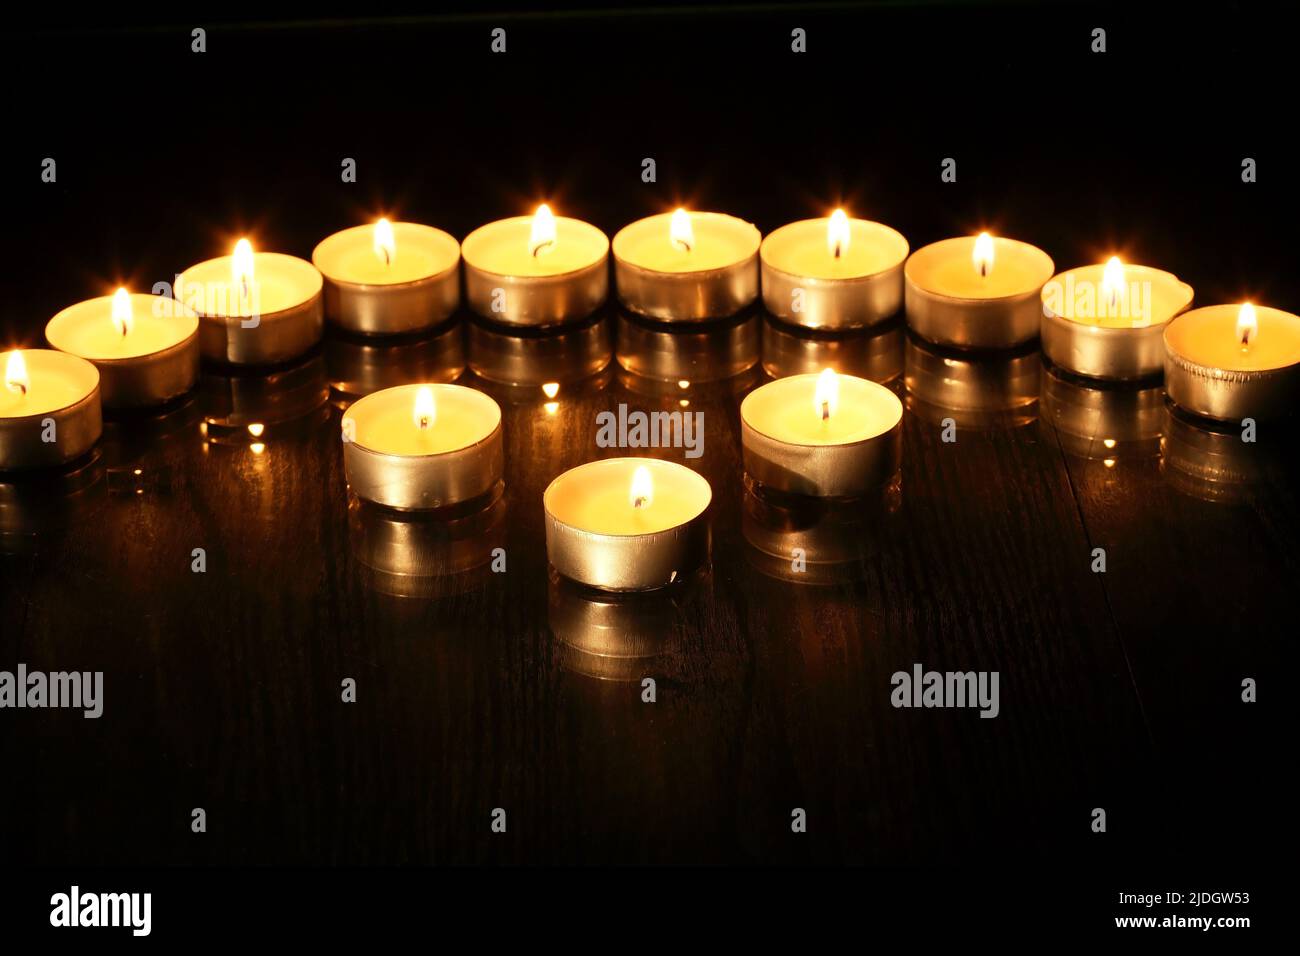 Set of flighting candles in a row against dark background Stock Photo